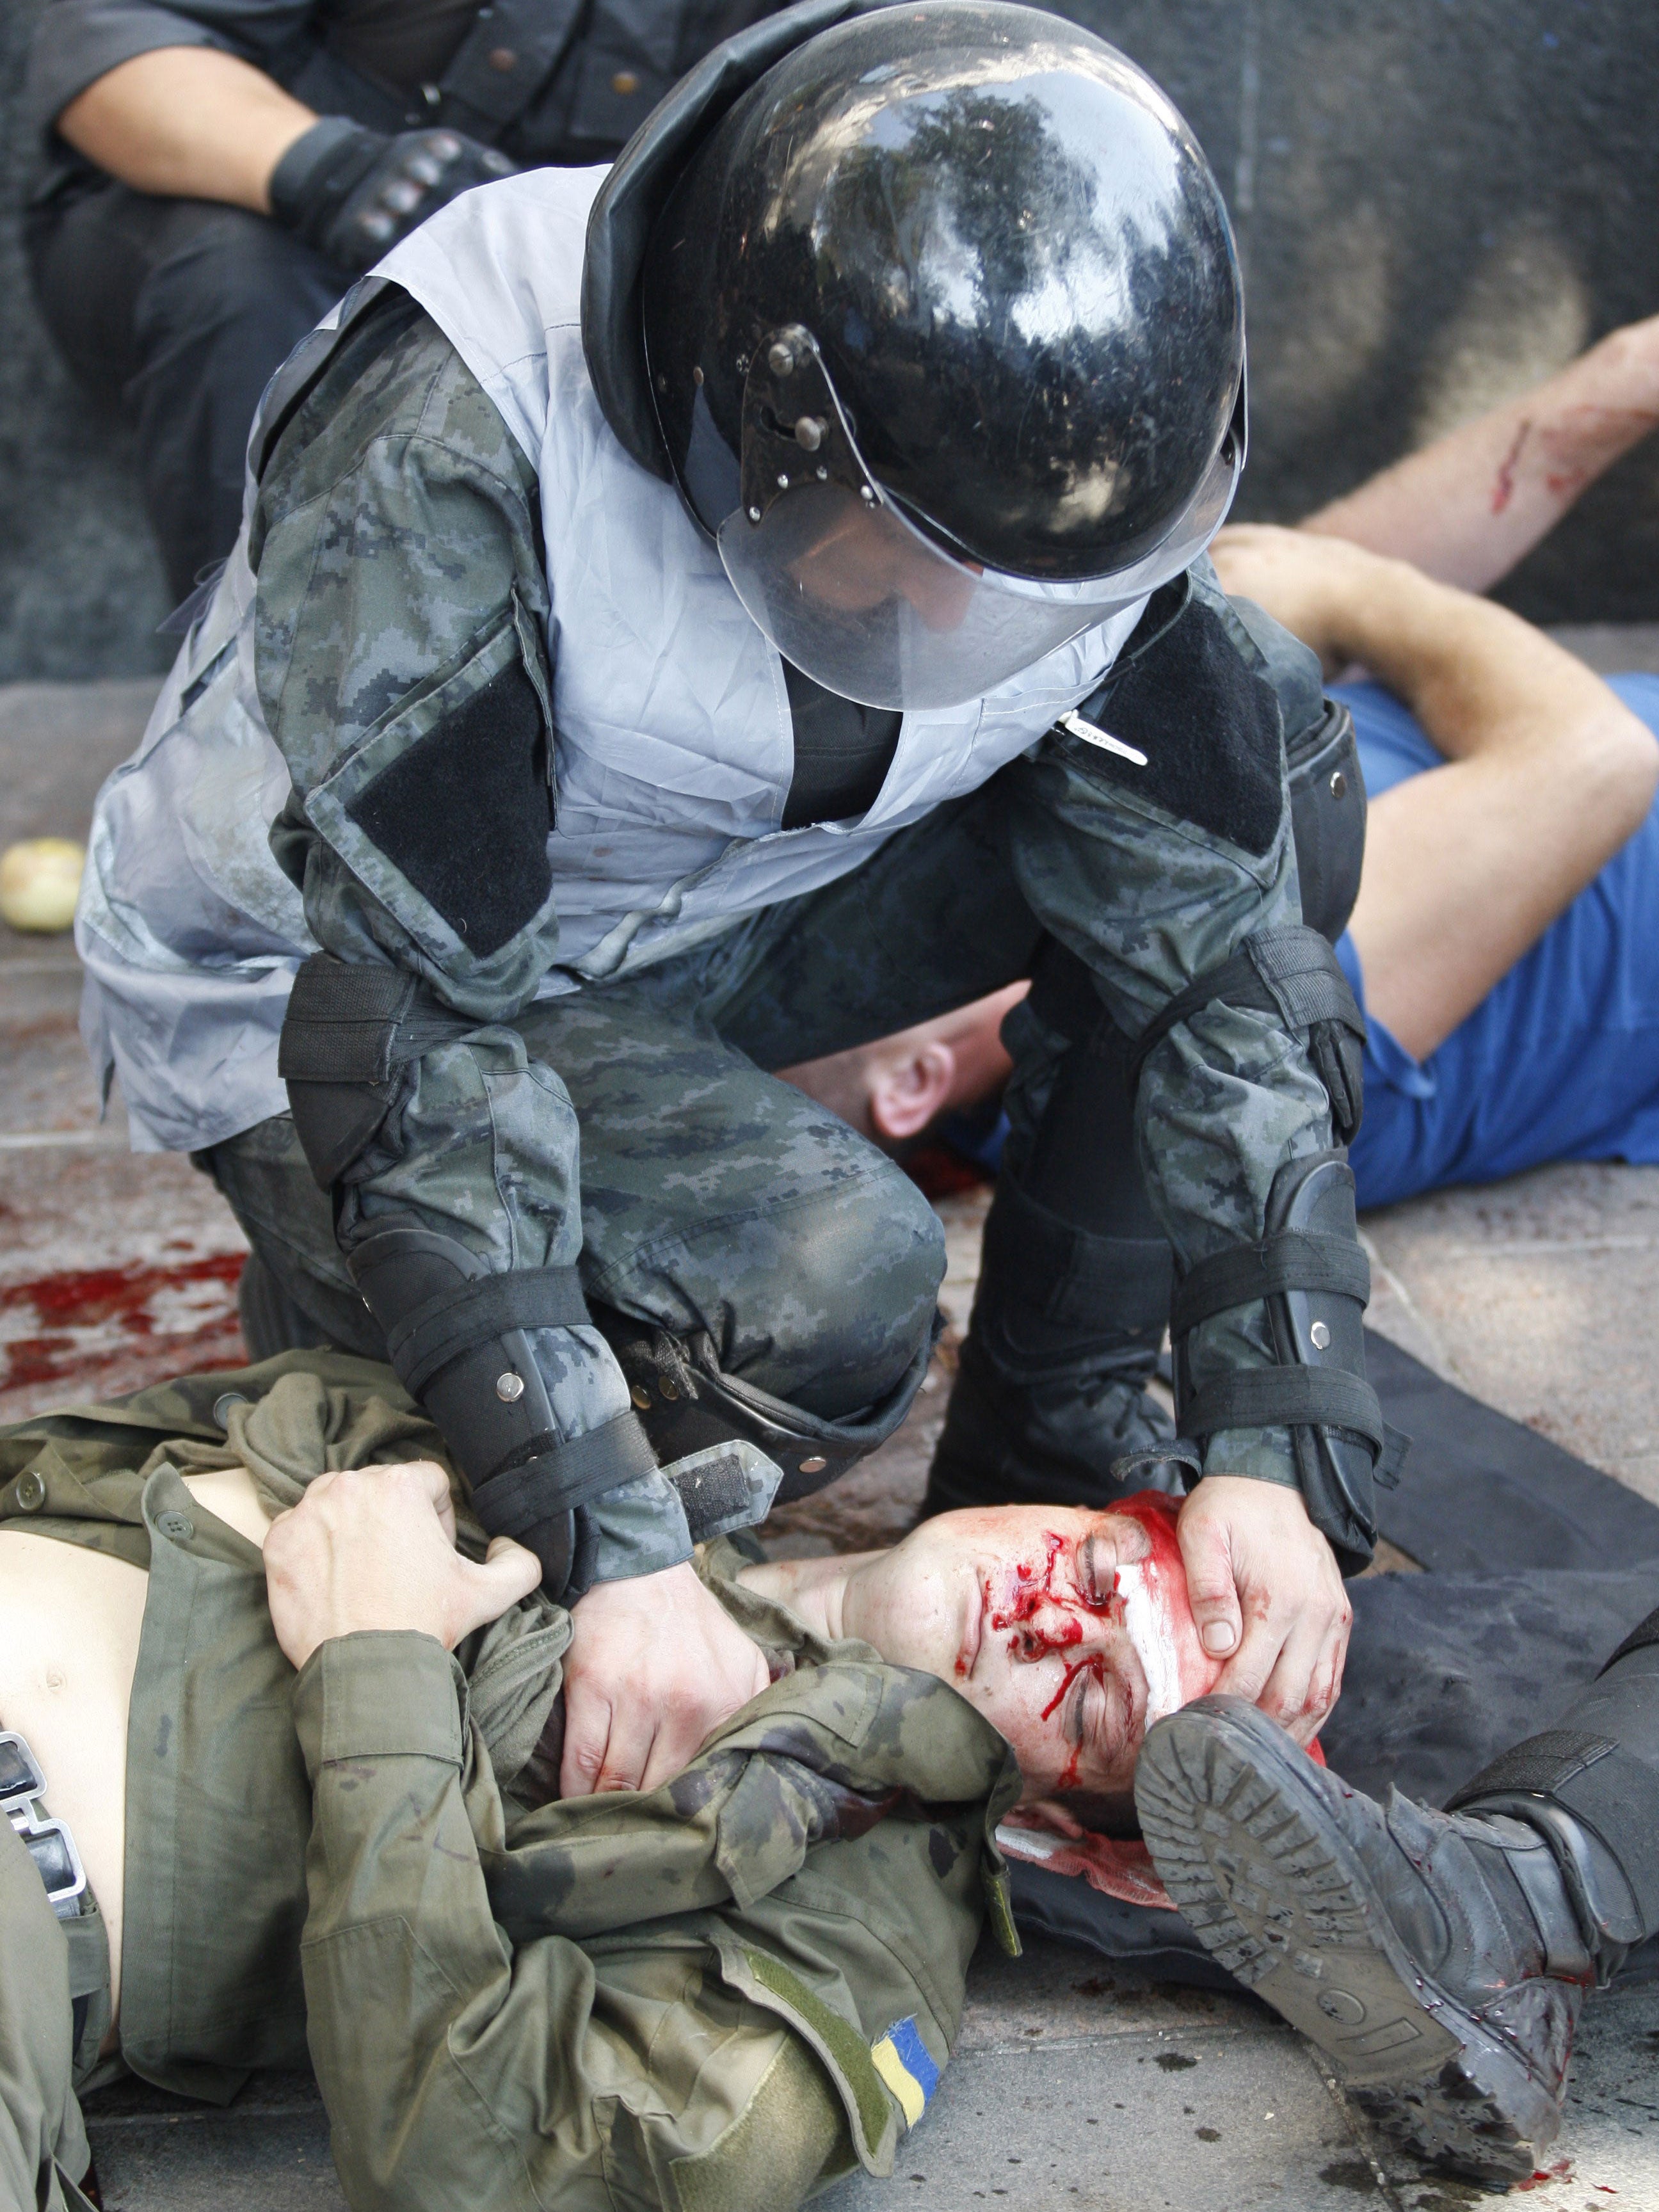 A policeman helps a wounded colleague in Kiev